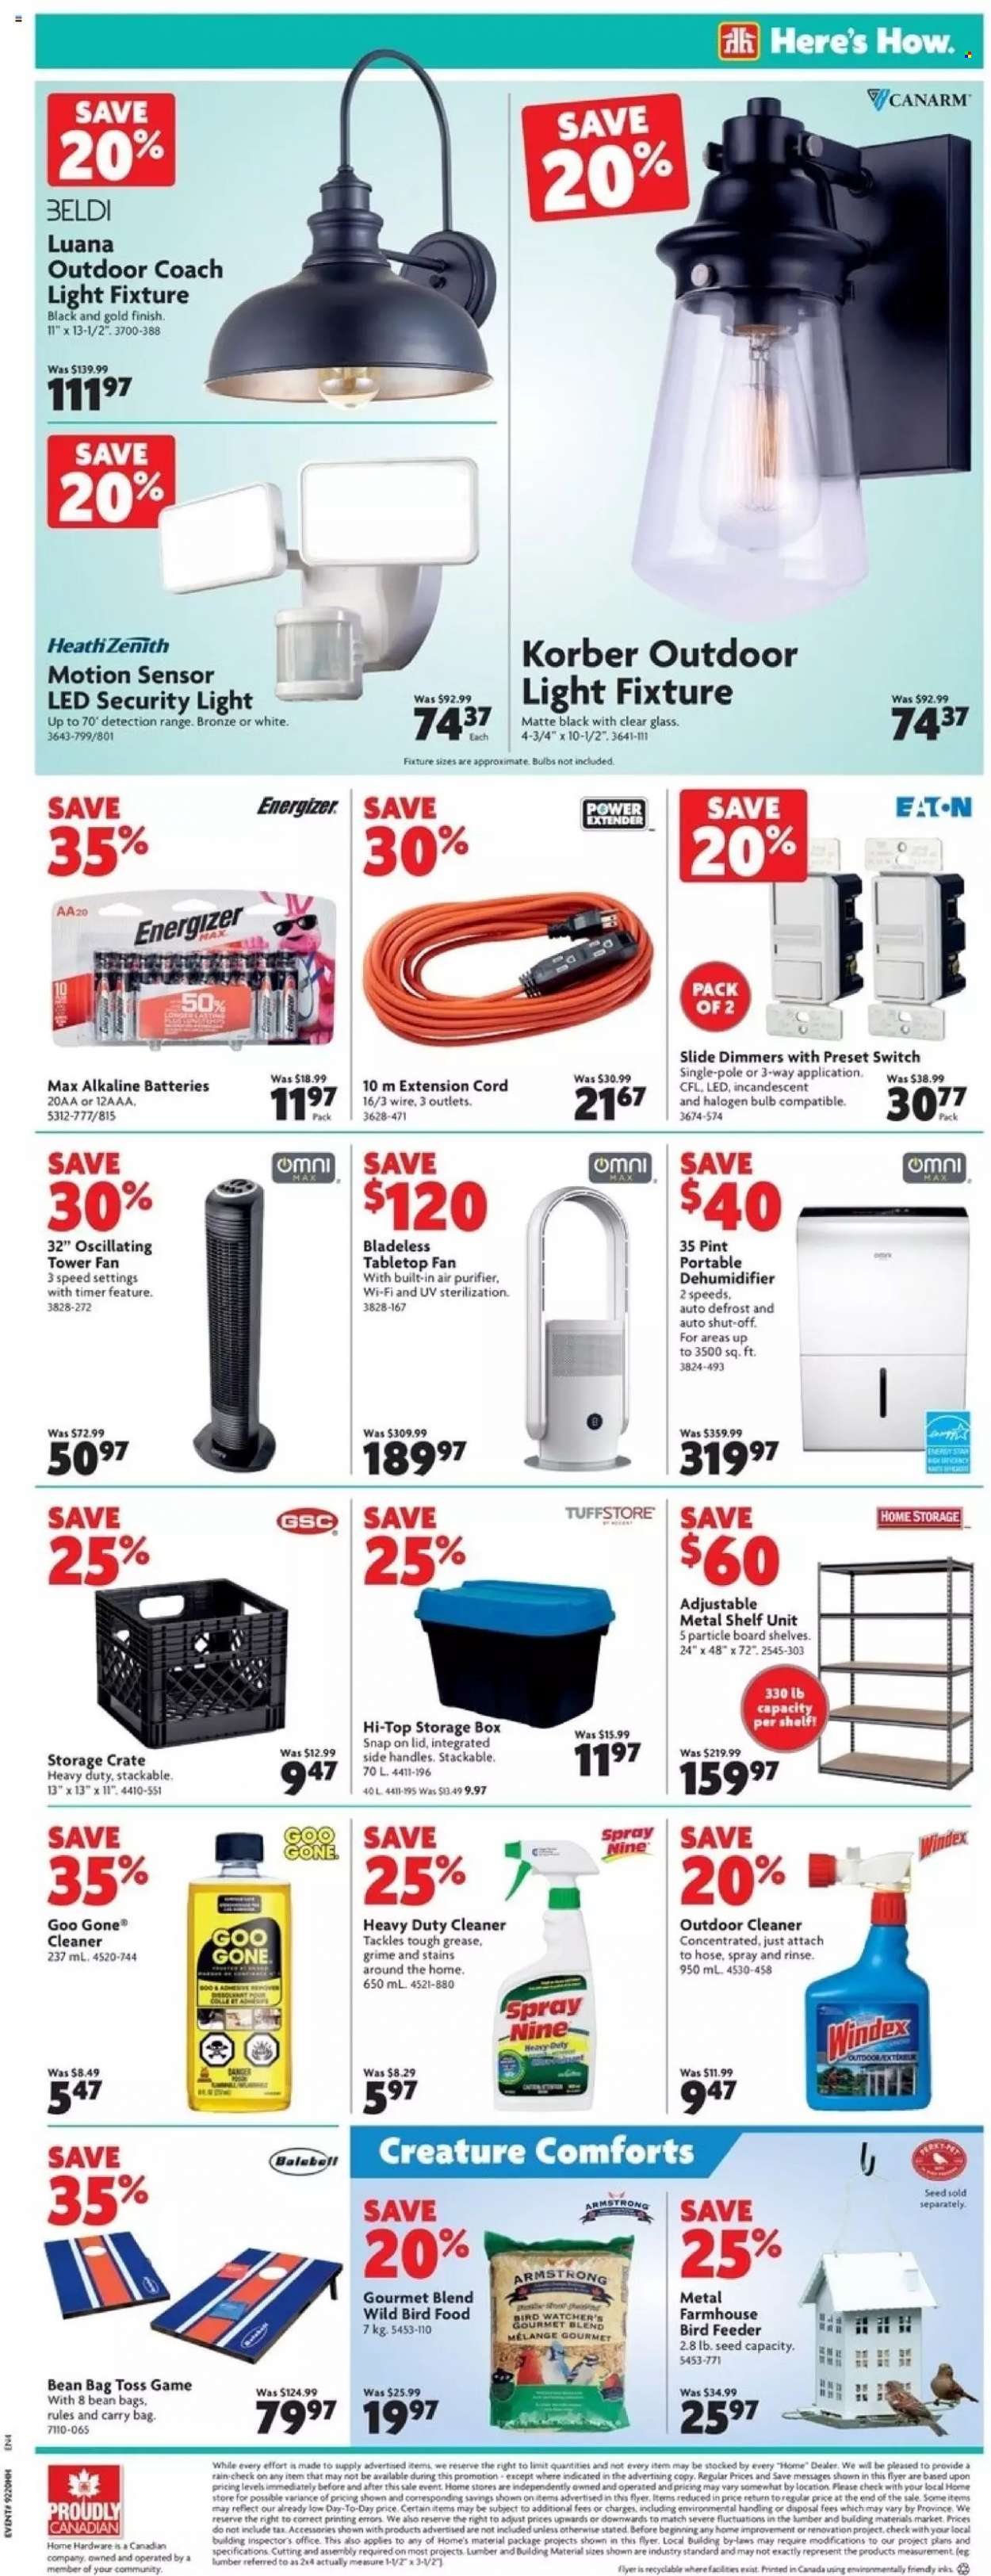 thumbnail - Home Hardware Flyer - May 12, 2022 - May 18, 2022 - Sales products - Windex, cleaner, air purifier, stand fan, storage box, bean bag, shelf unit, switch, extension cord, crate, plant seeds, battery, Energizer. Page 9.